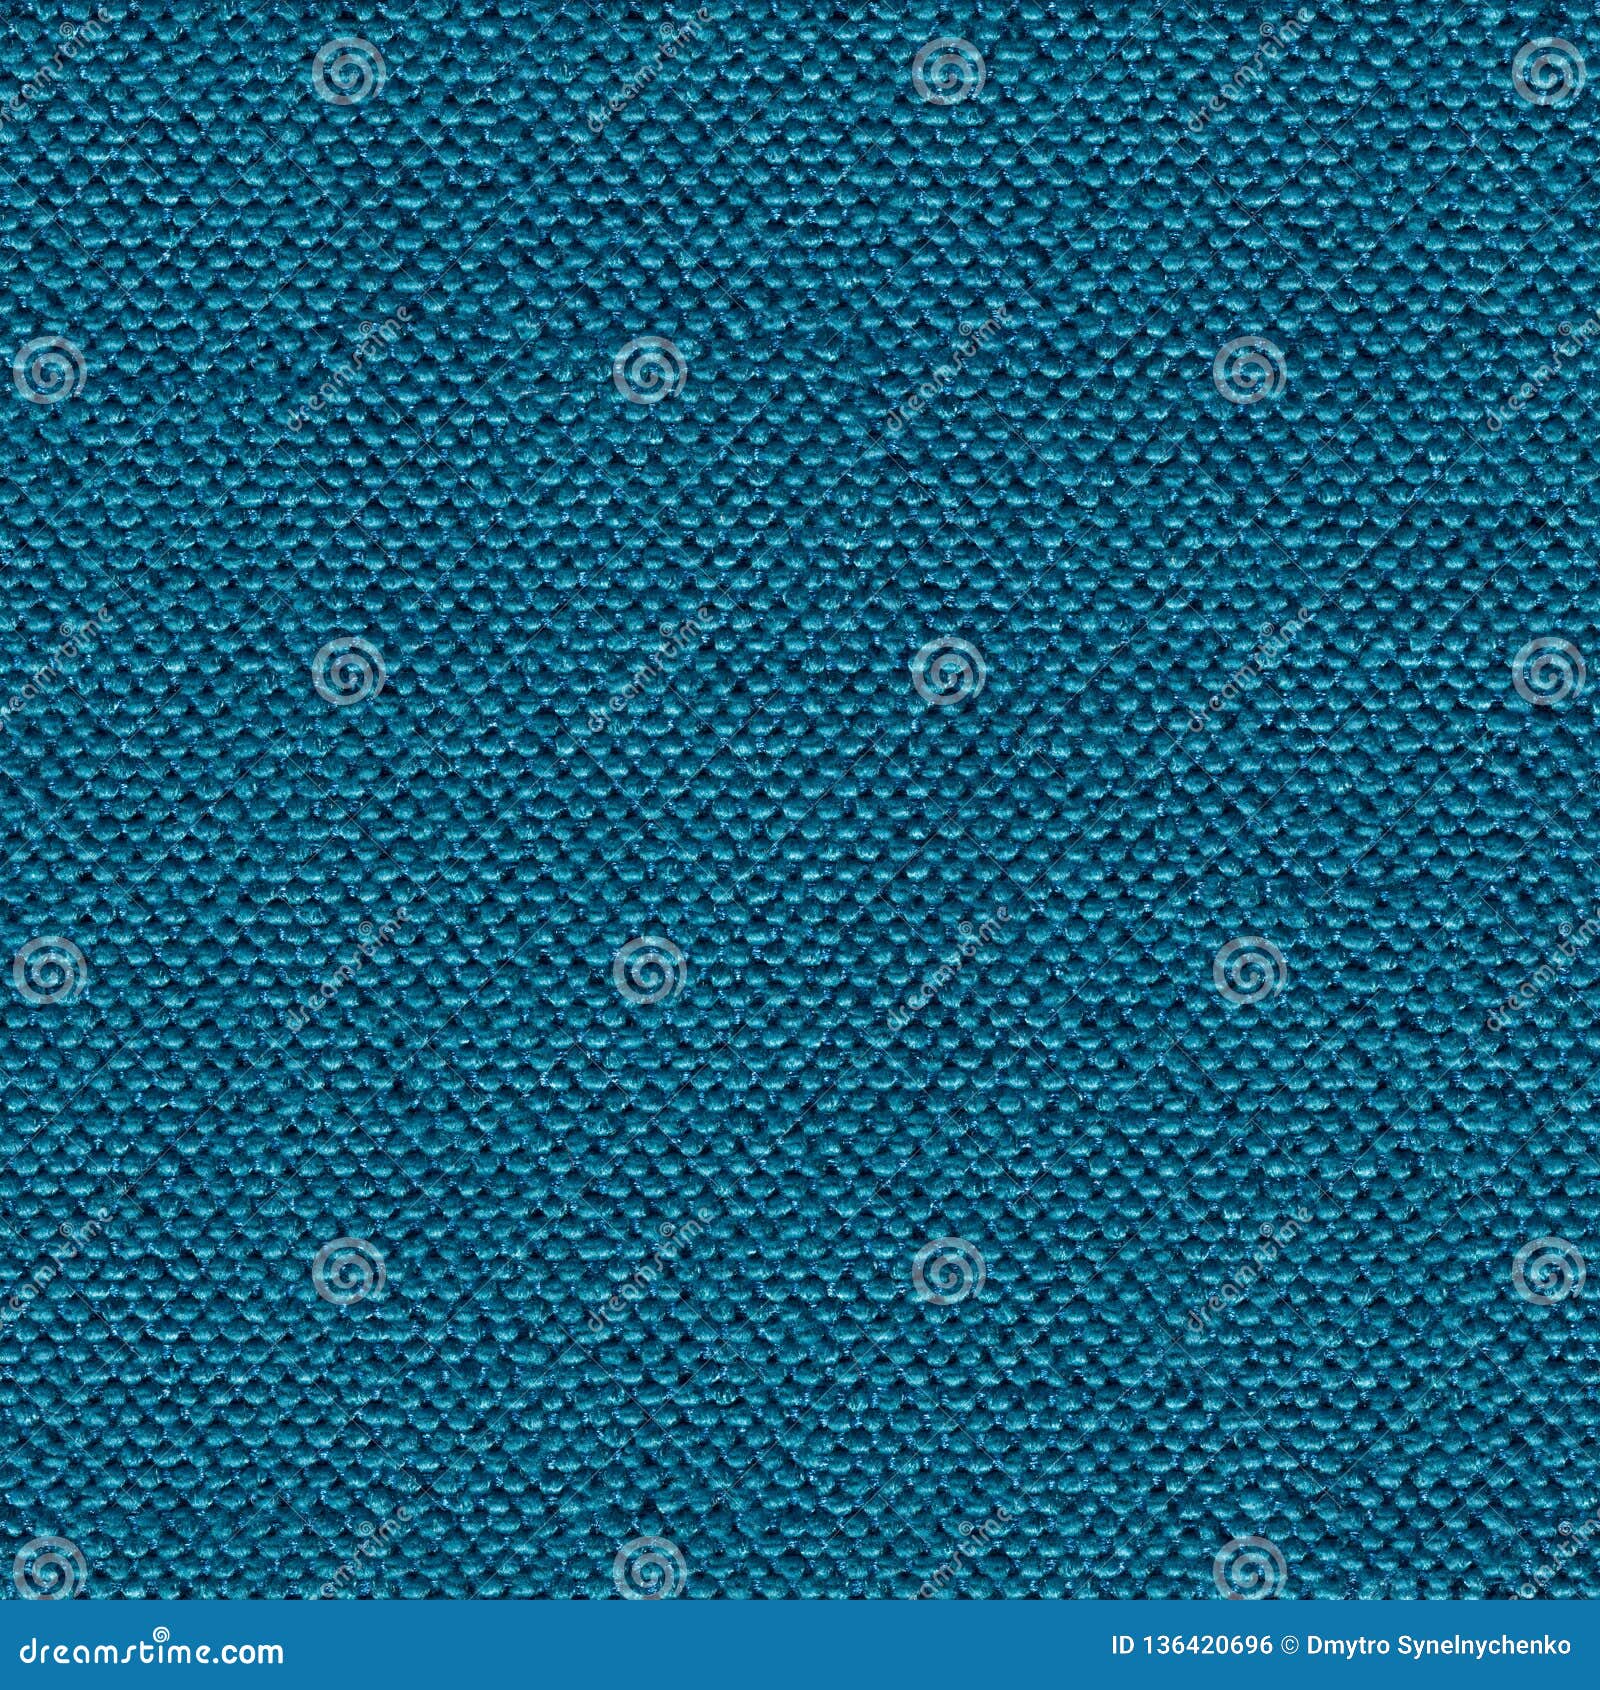 Perfect Blue Fabric Background for Design. Seamless Square Texture ...